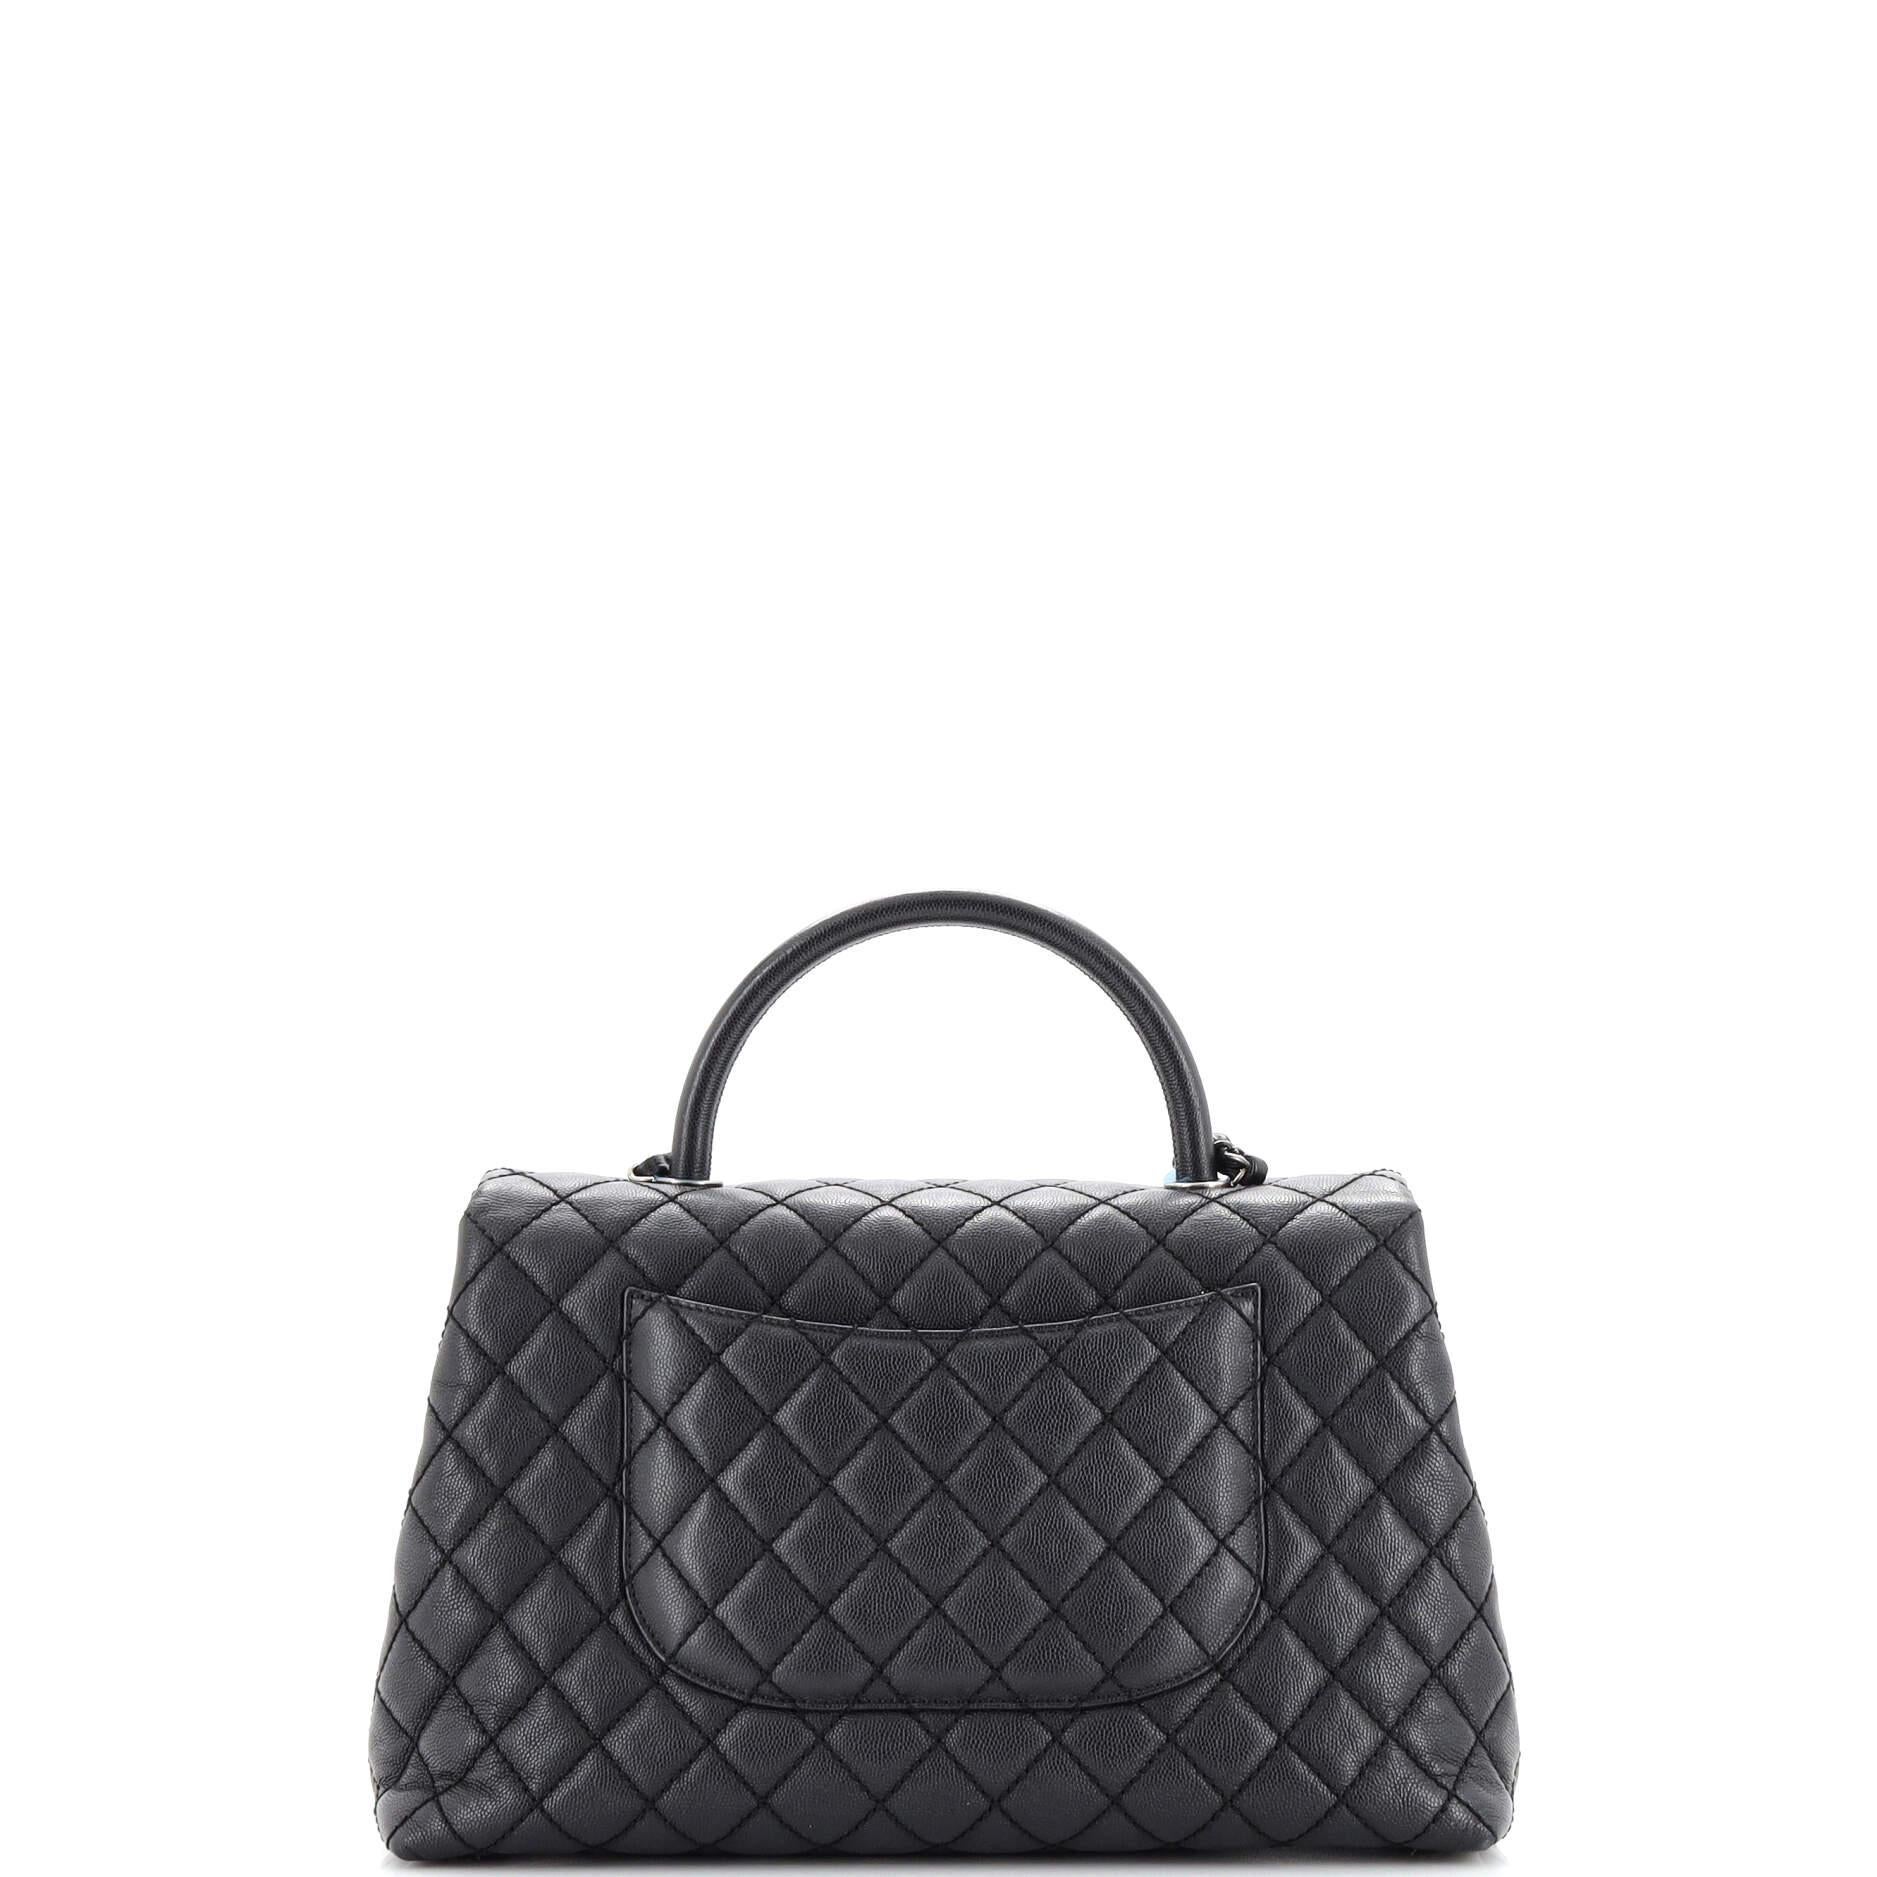 Women's or Men's Chanel Coco Top Handle Bag Quilted Caviar Medium